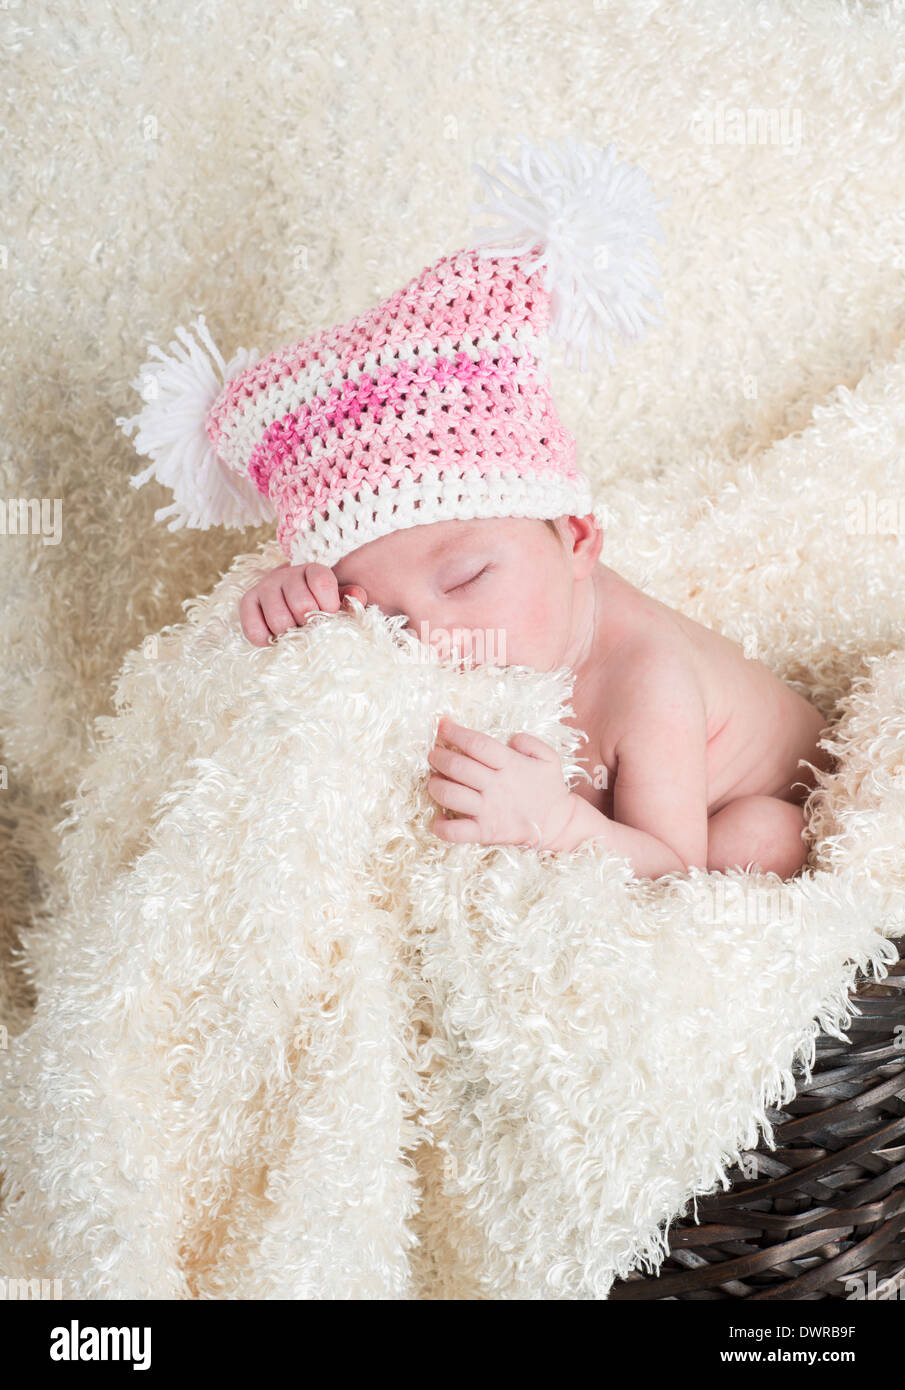 Beautiful newborn baby wearing a pink hat with white pom poms sleeping in a brown woven basket on a soft cream colored blanket Stock Photo